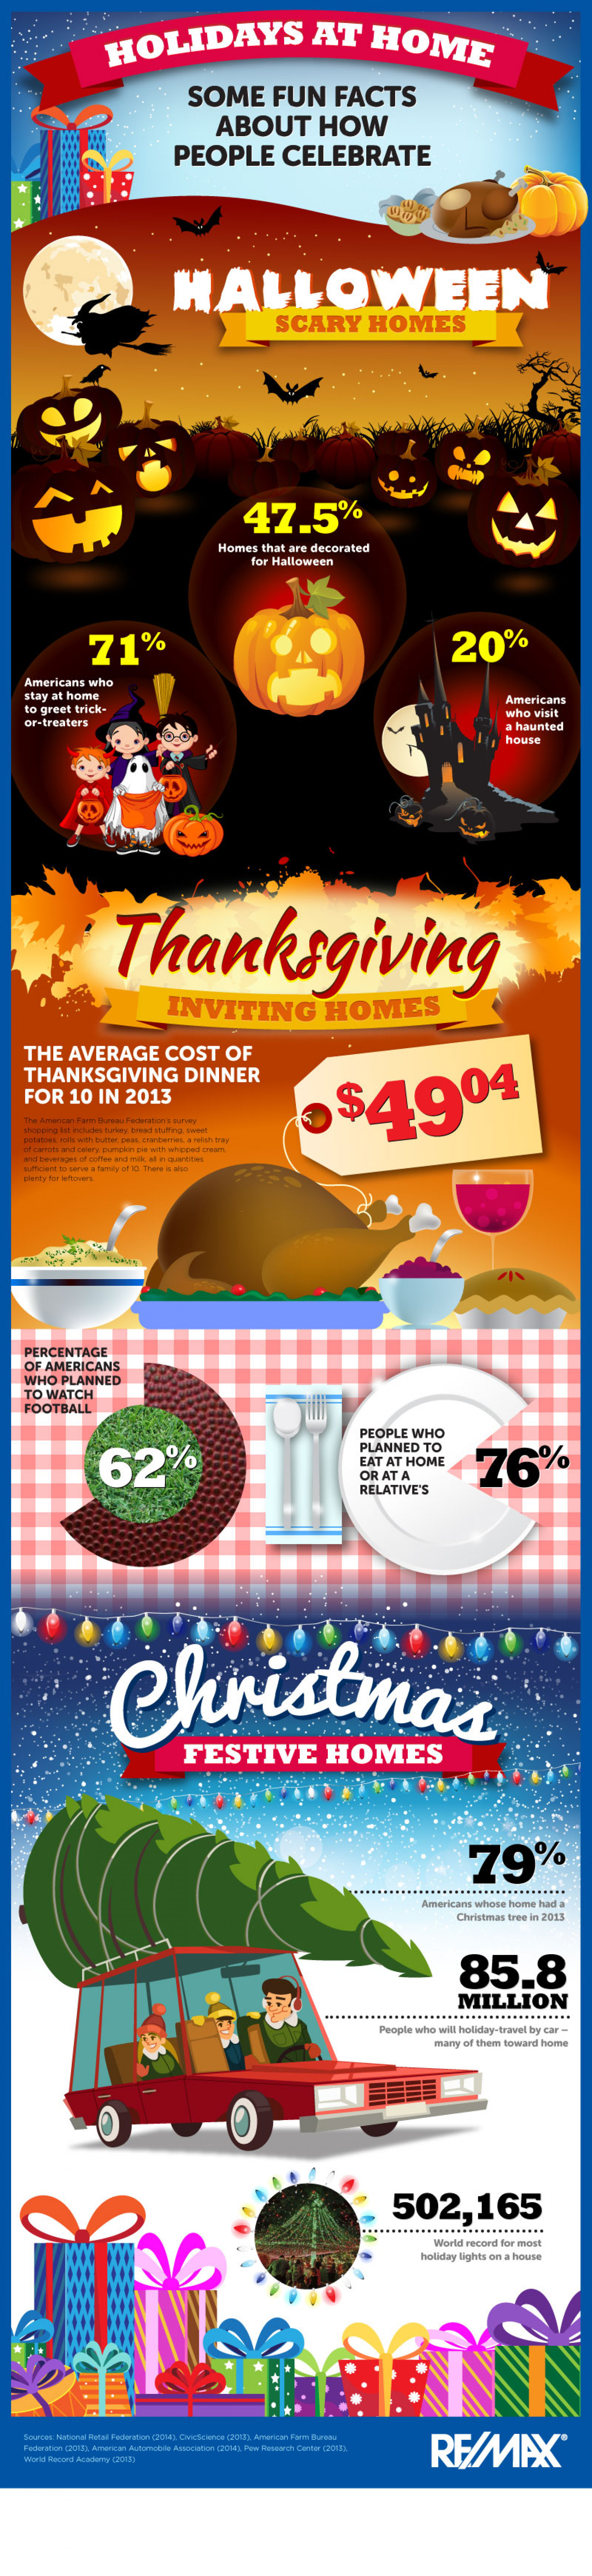 Holidays at Home Infographic